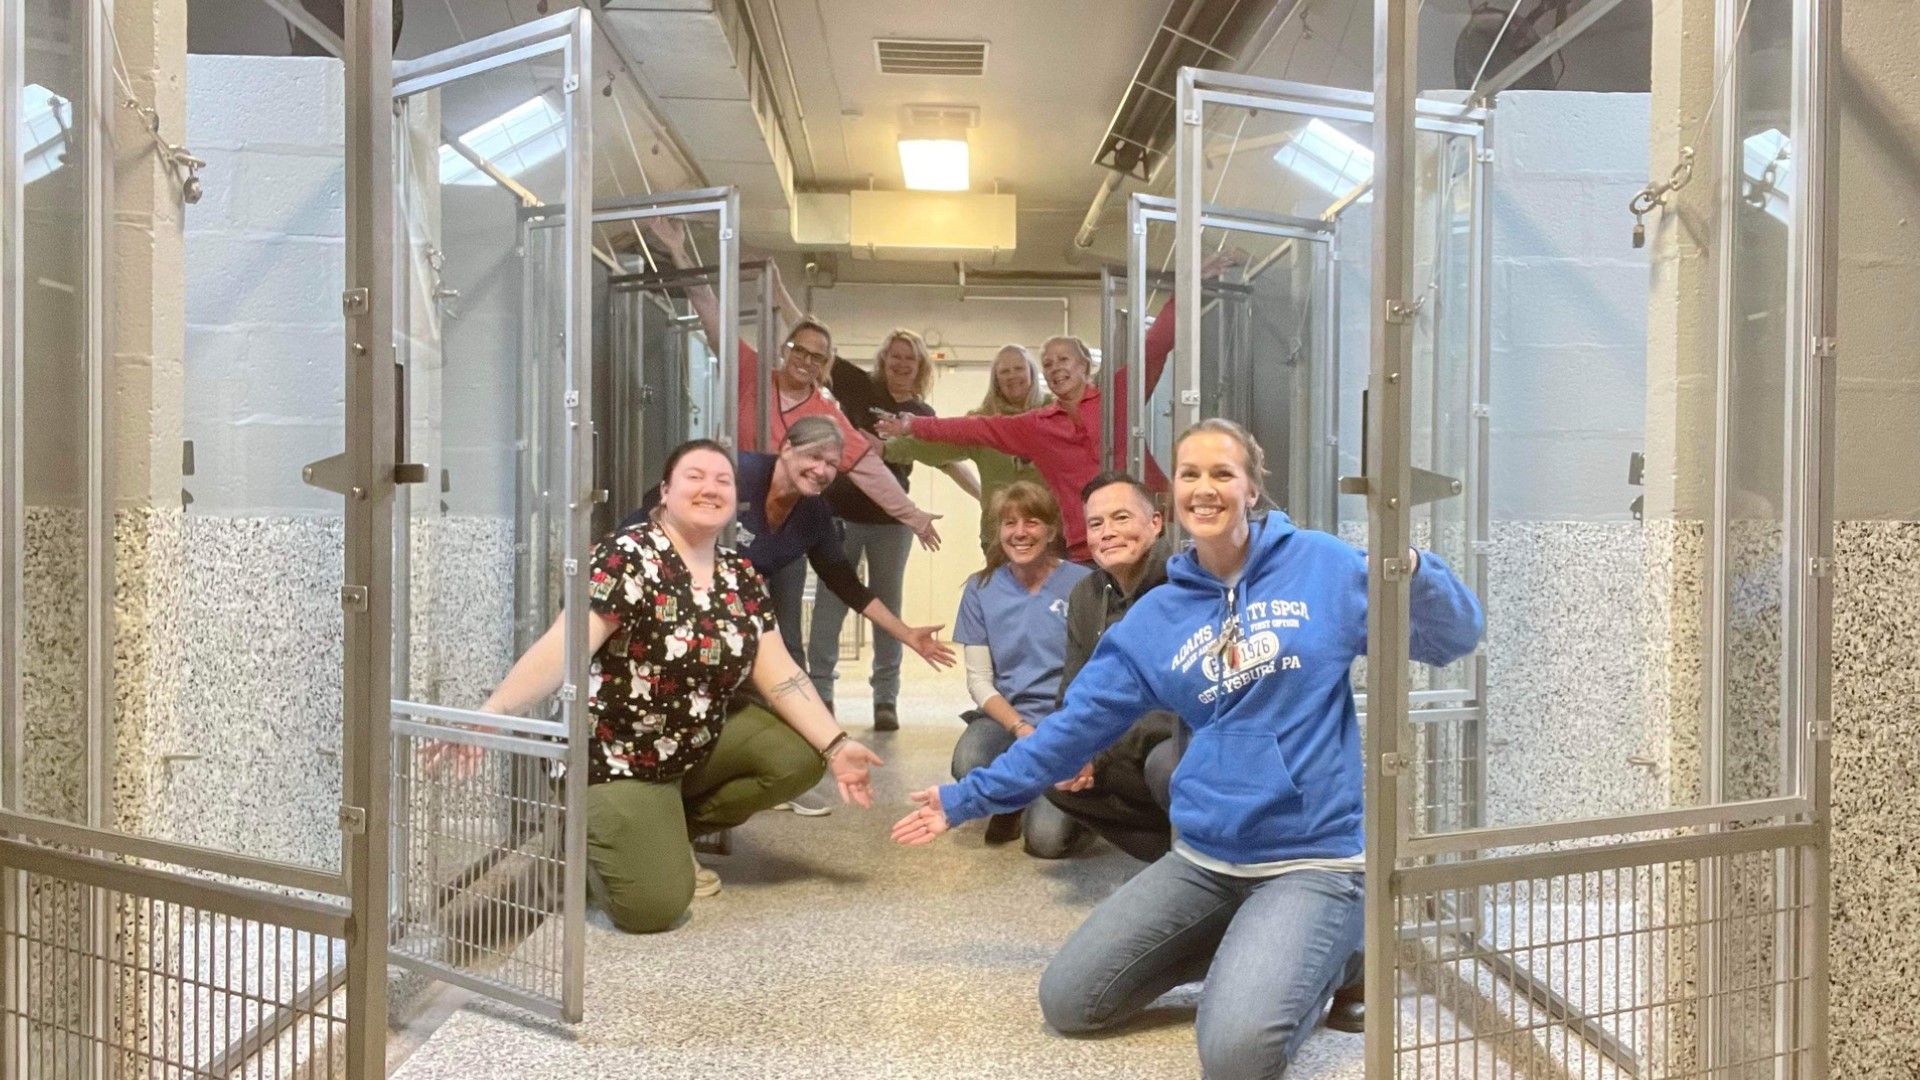 They now hope to help other Pennsylvania shelters by taking in some of their animals to relieve some of their stress.